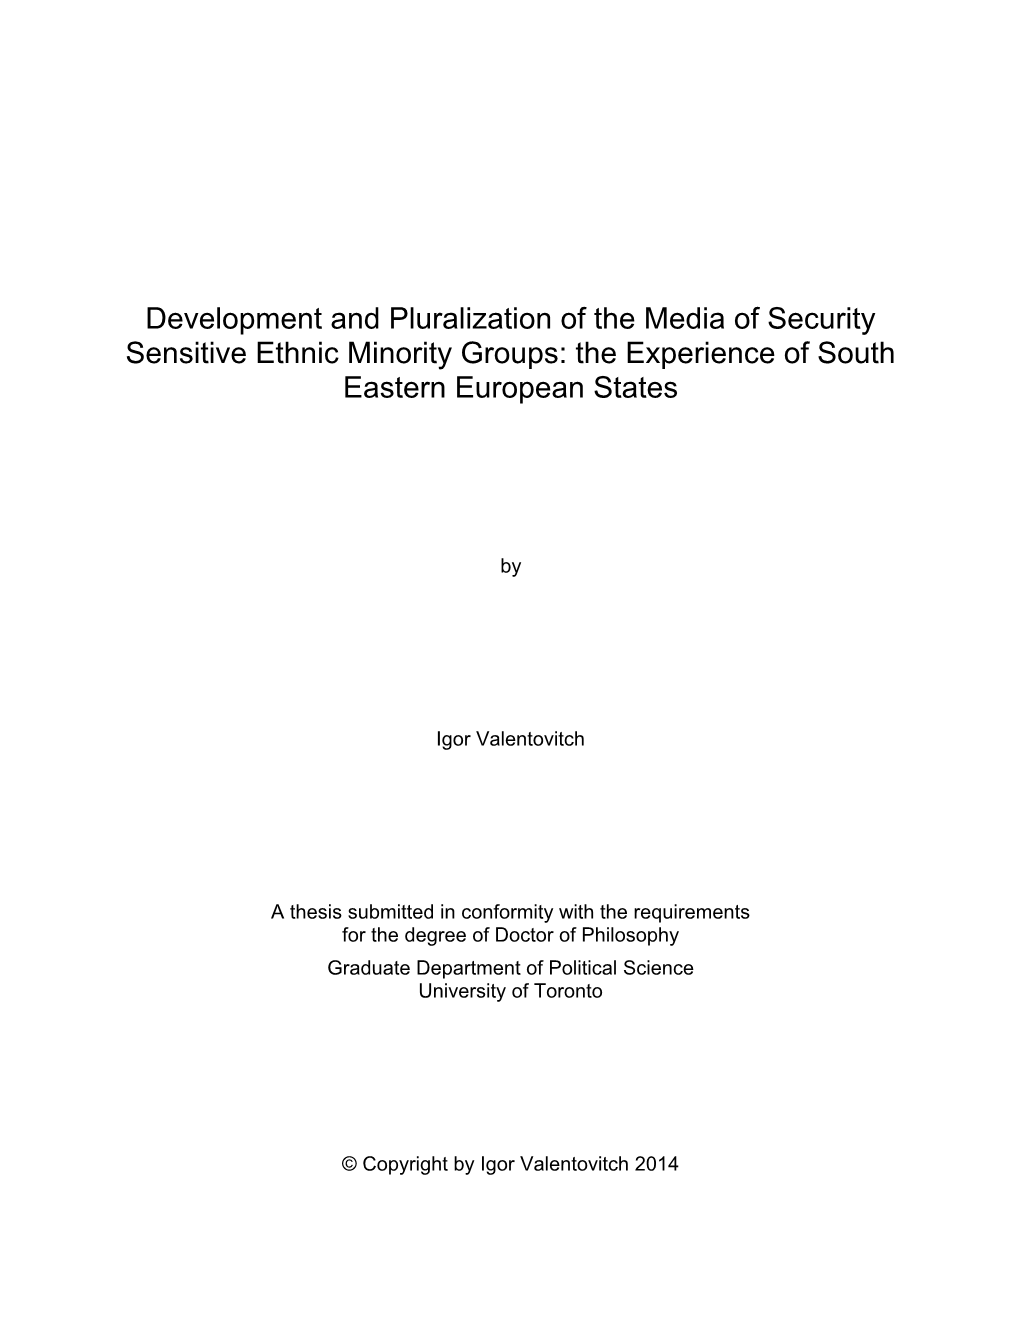 Development and Pluralization of the Media of Security Sensitive Ethnic Minority Groups: the Experience of South Eastern European States